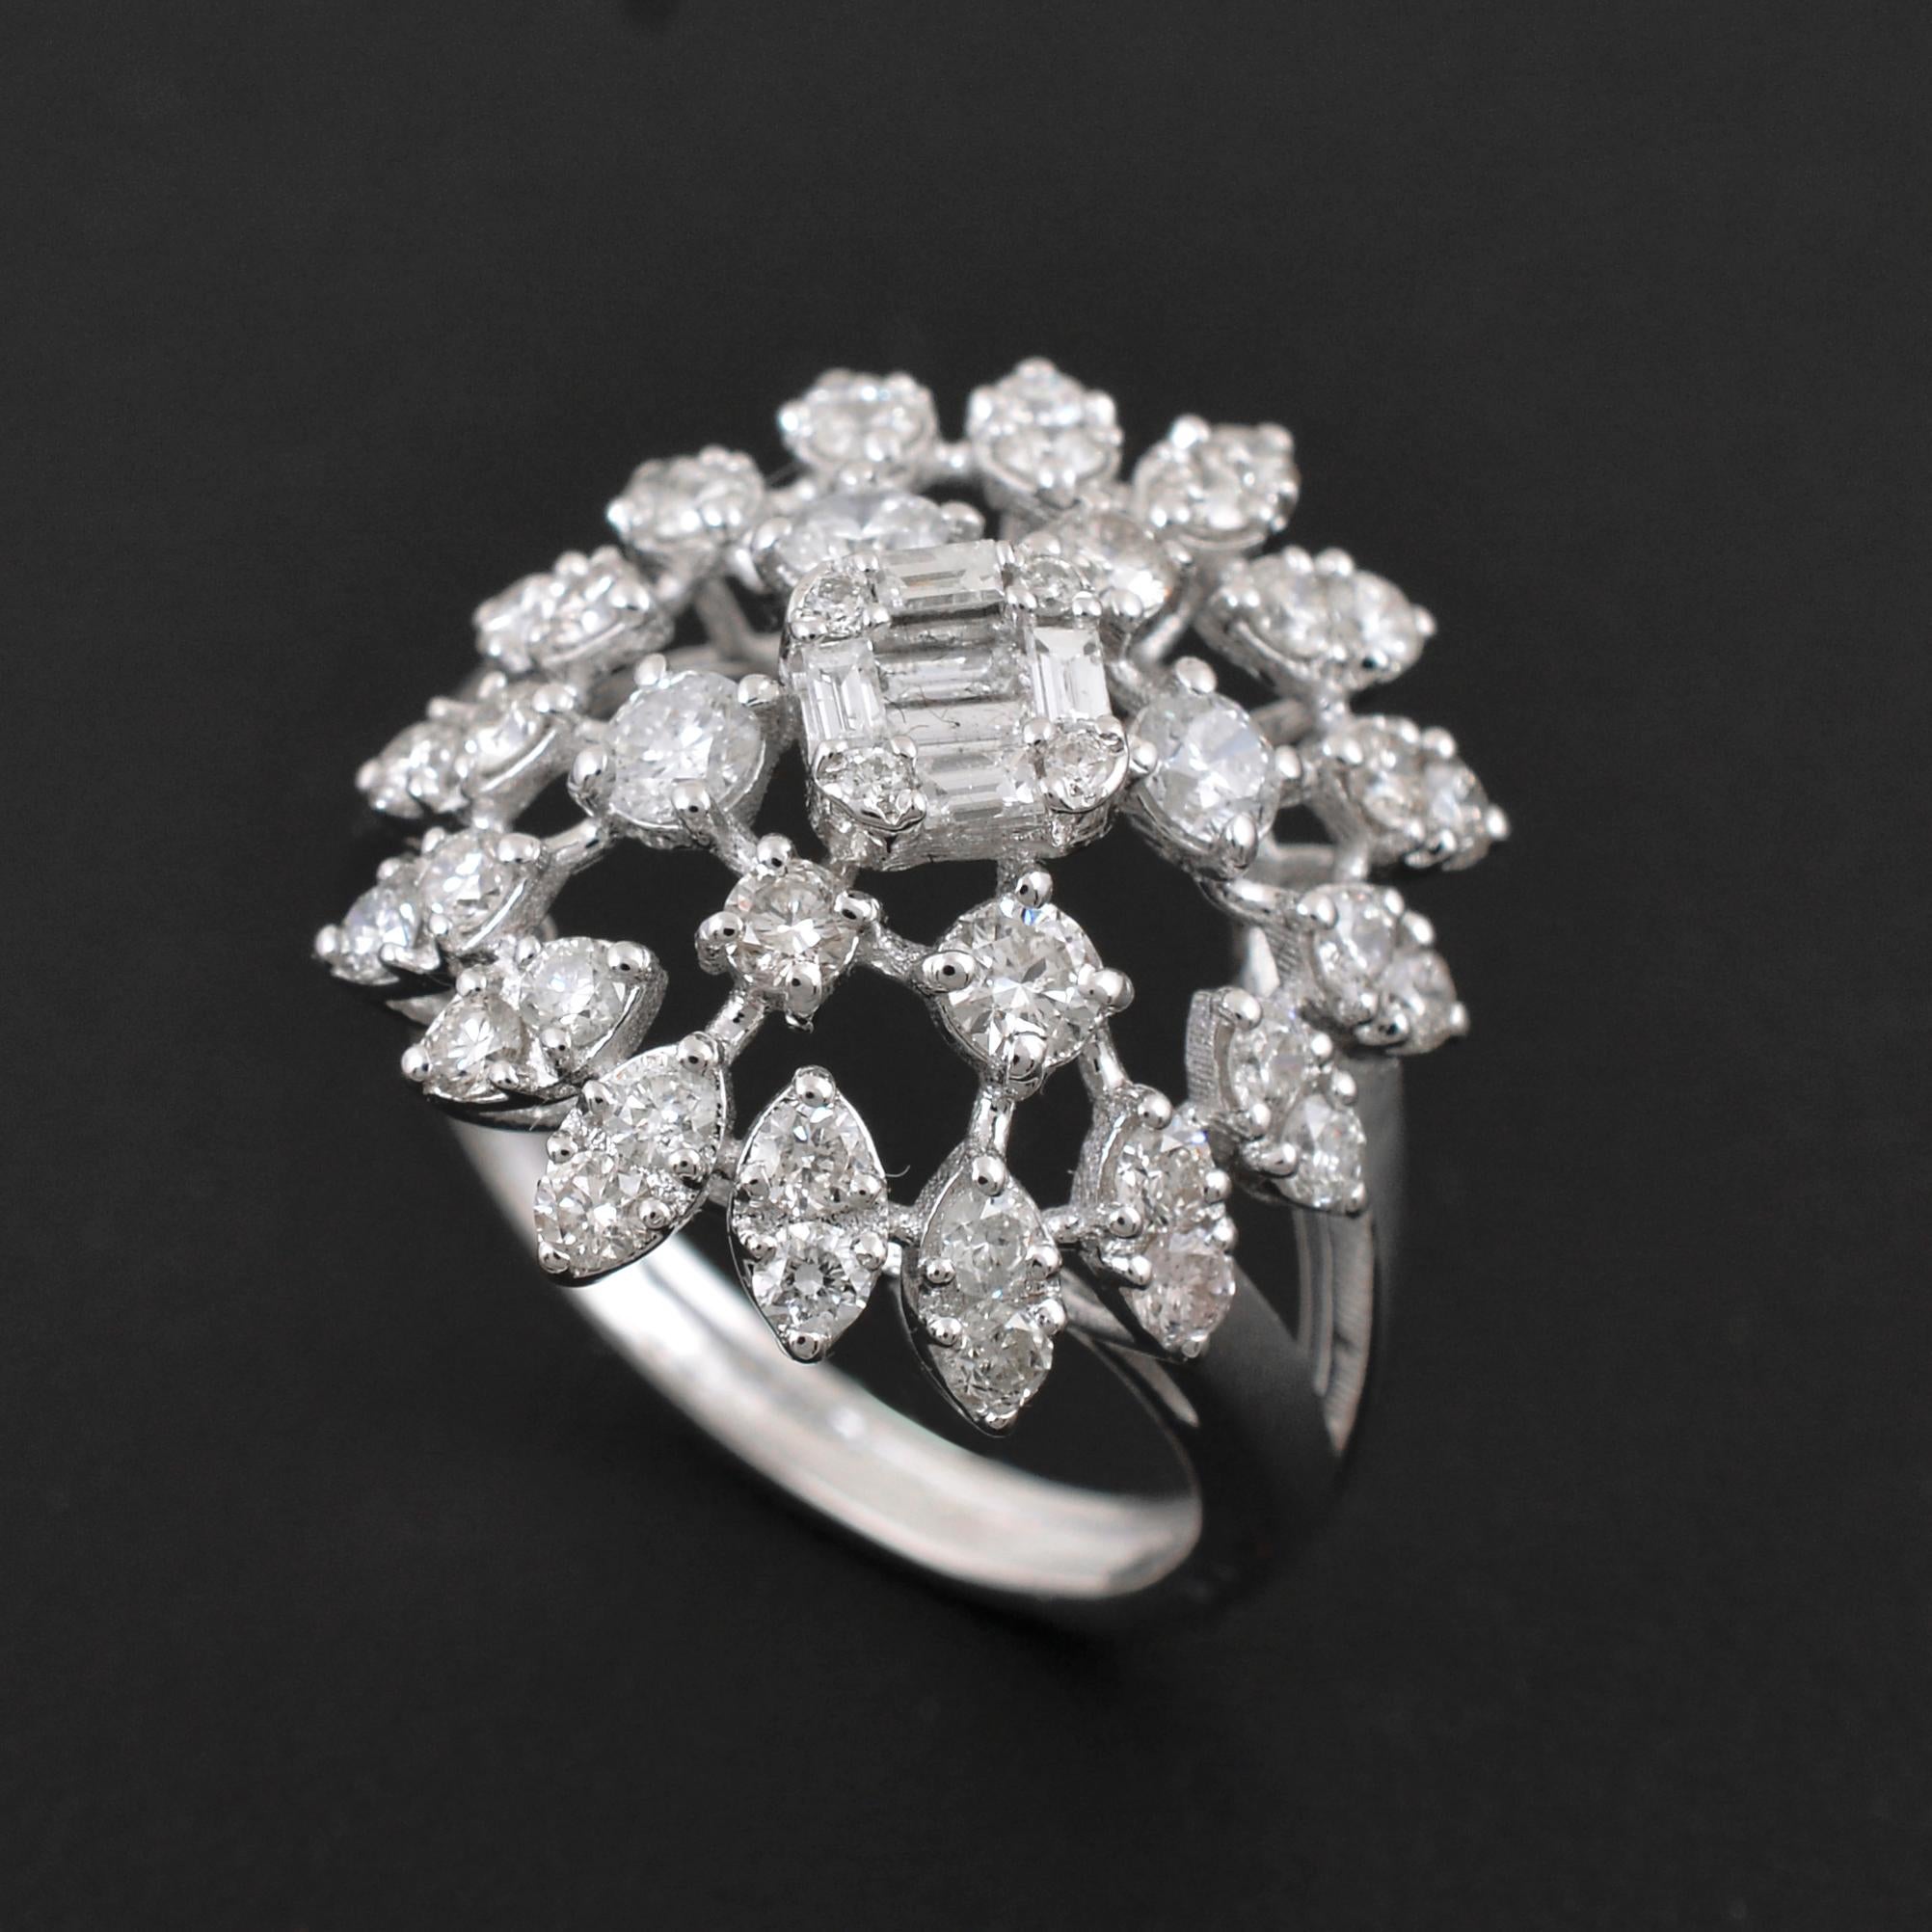 For Sale:  1.70 Carat SI Clarity HI Color Diamond Cocktail Ring 18 Karat White Gold Jewelry 4